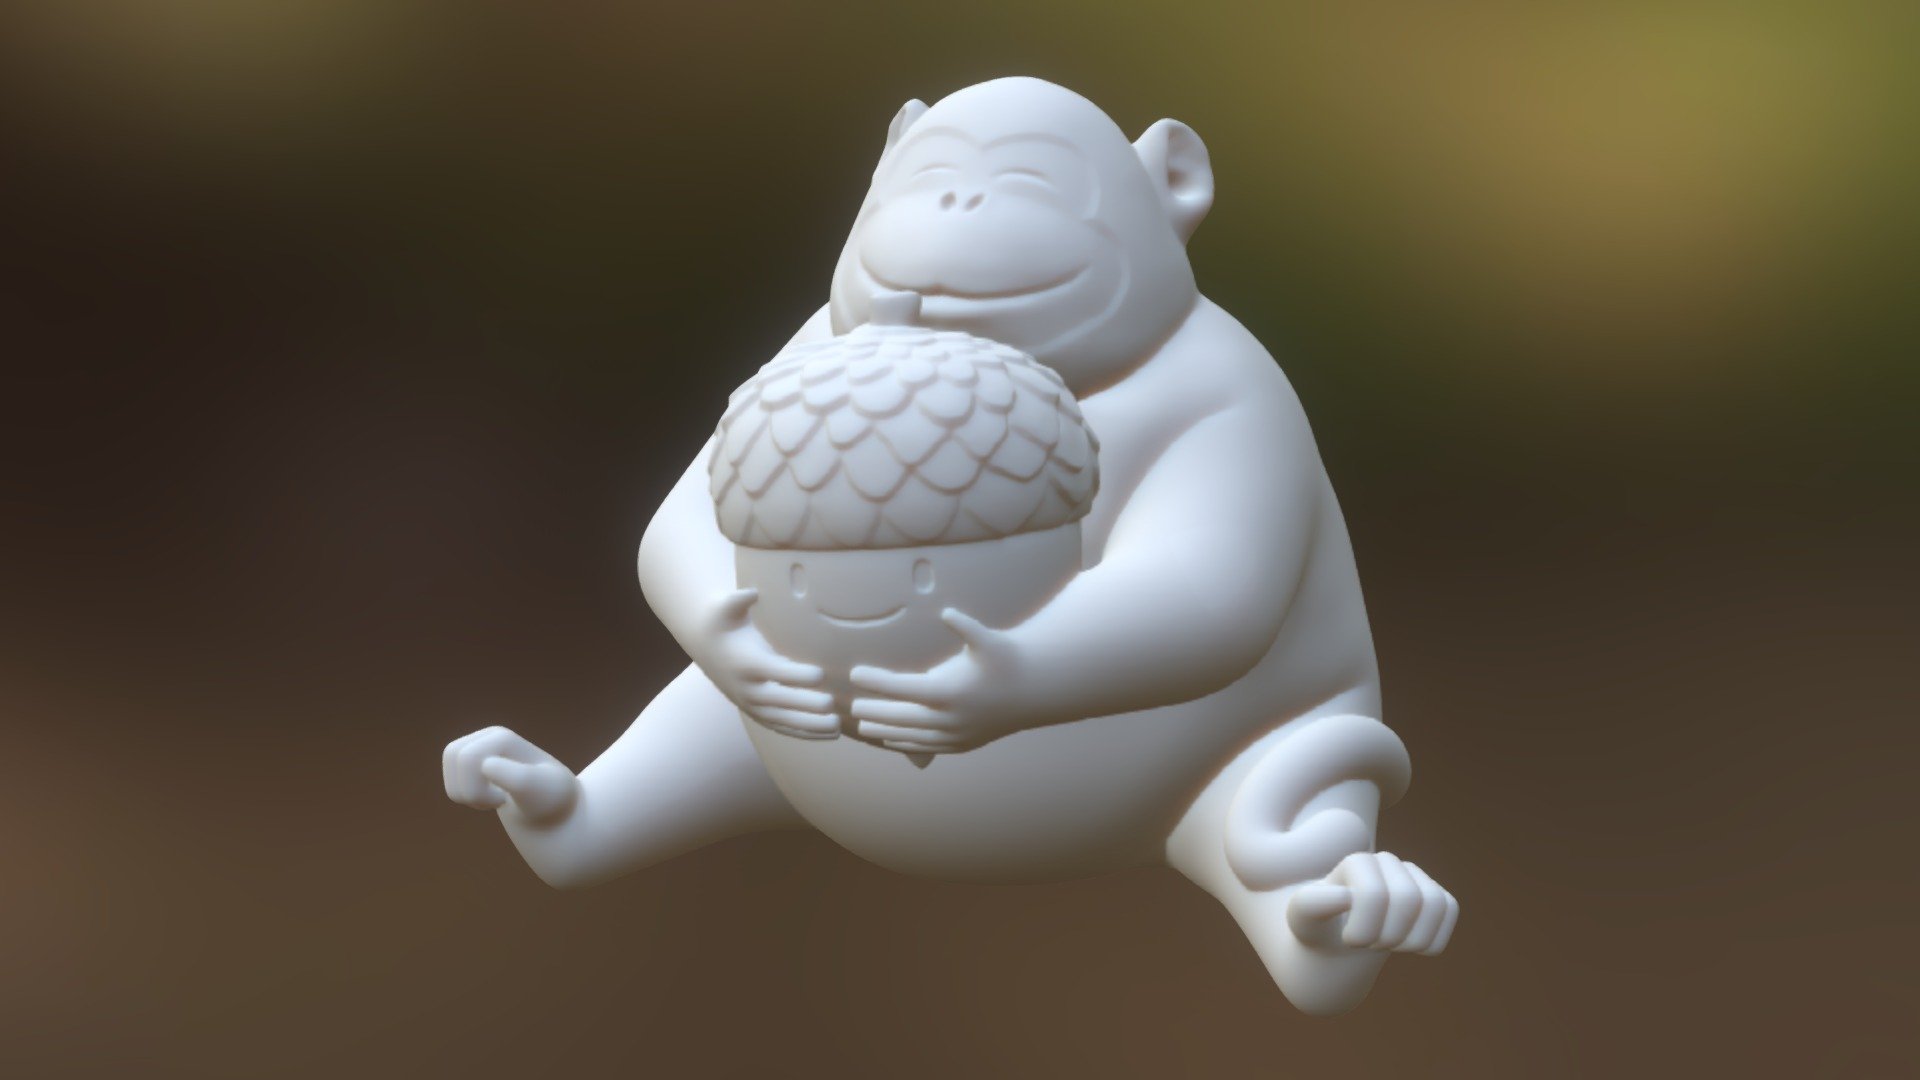 Quick Zbrush sculpt for 3D printing: ![](Sculpted in Zbrush for 3D print.   - Monkey and Acorn - 3D model by Nick Tustin (@ntust8) 3d model